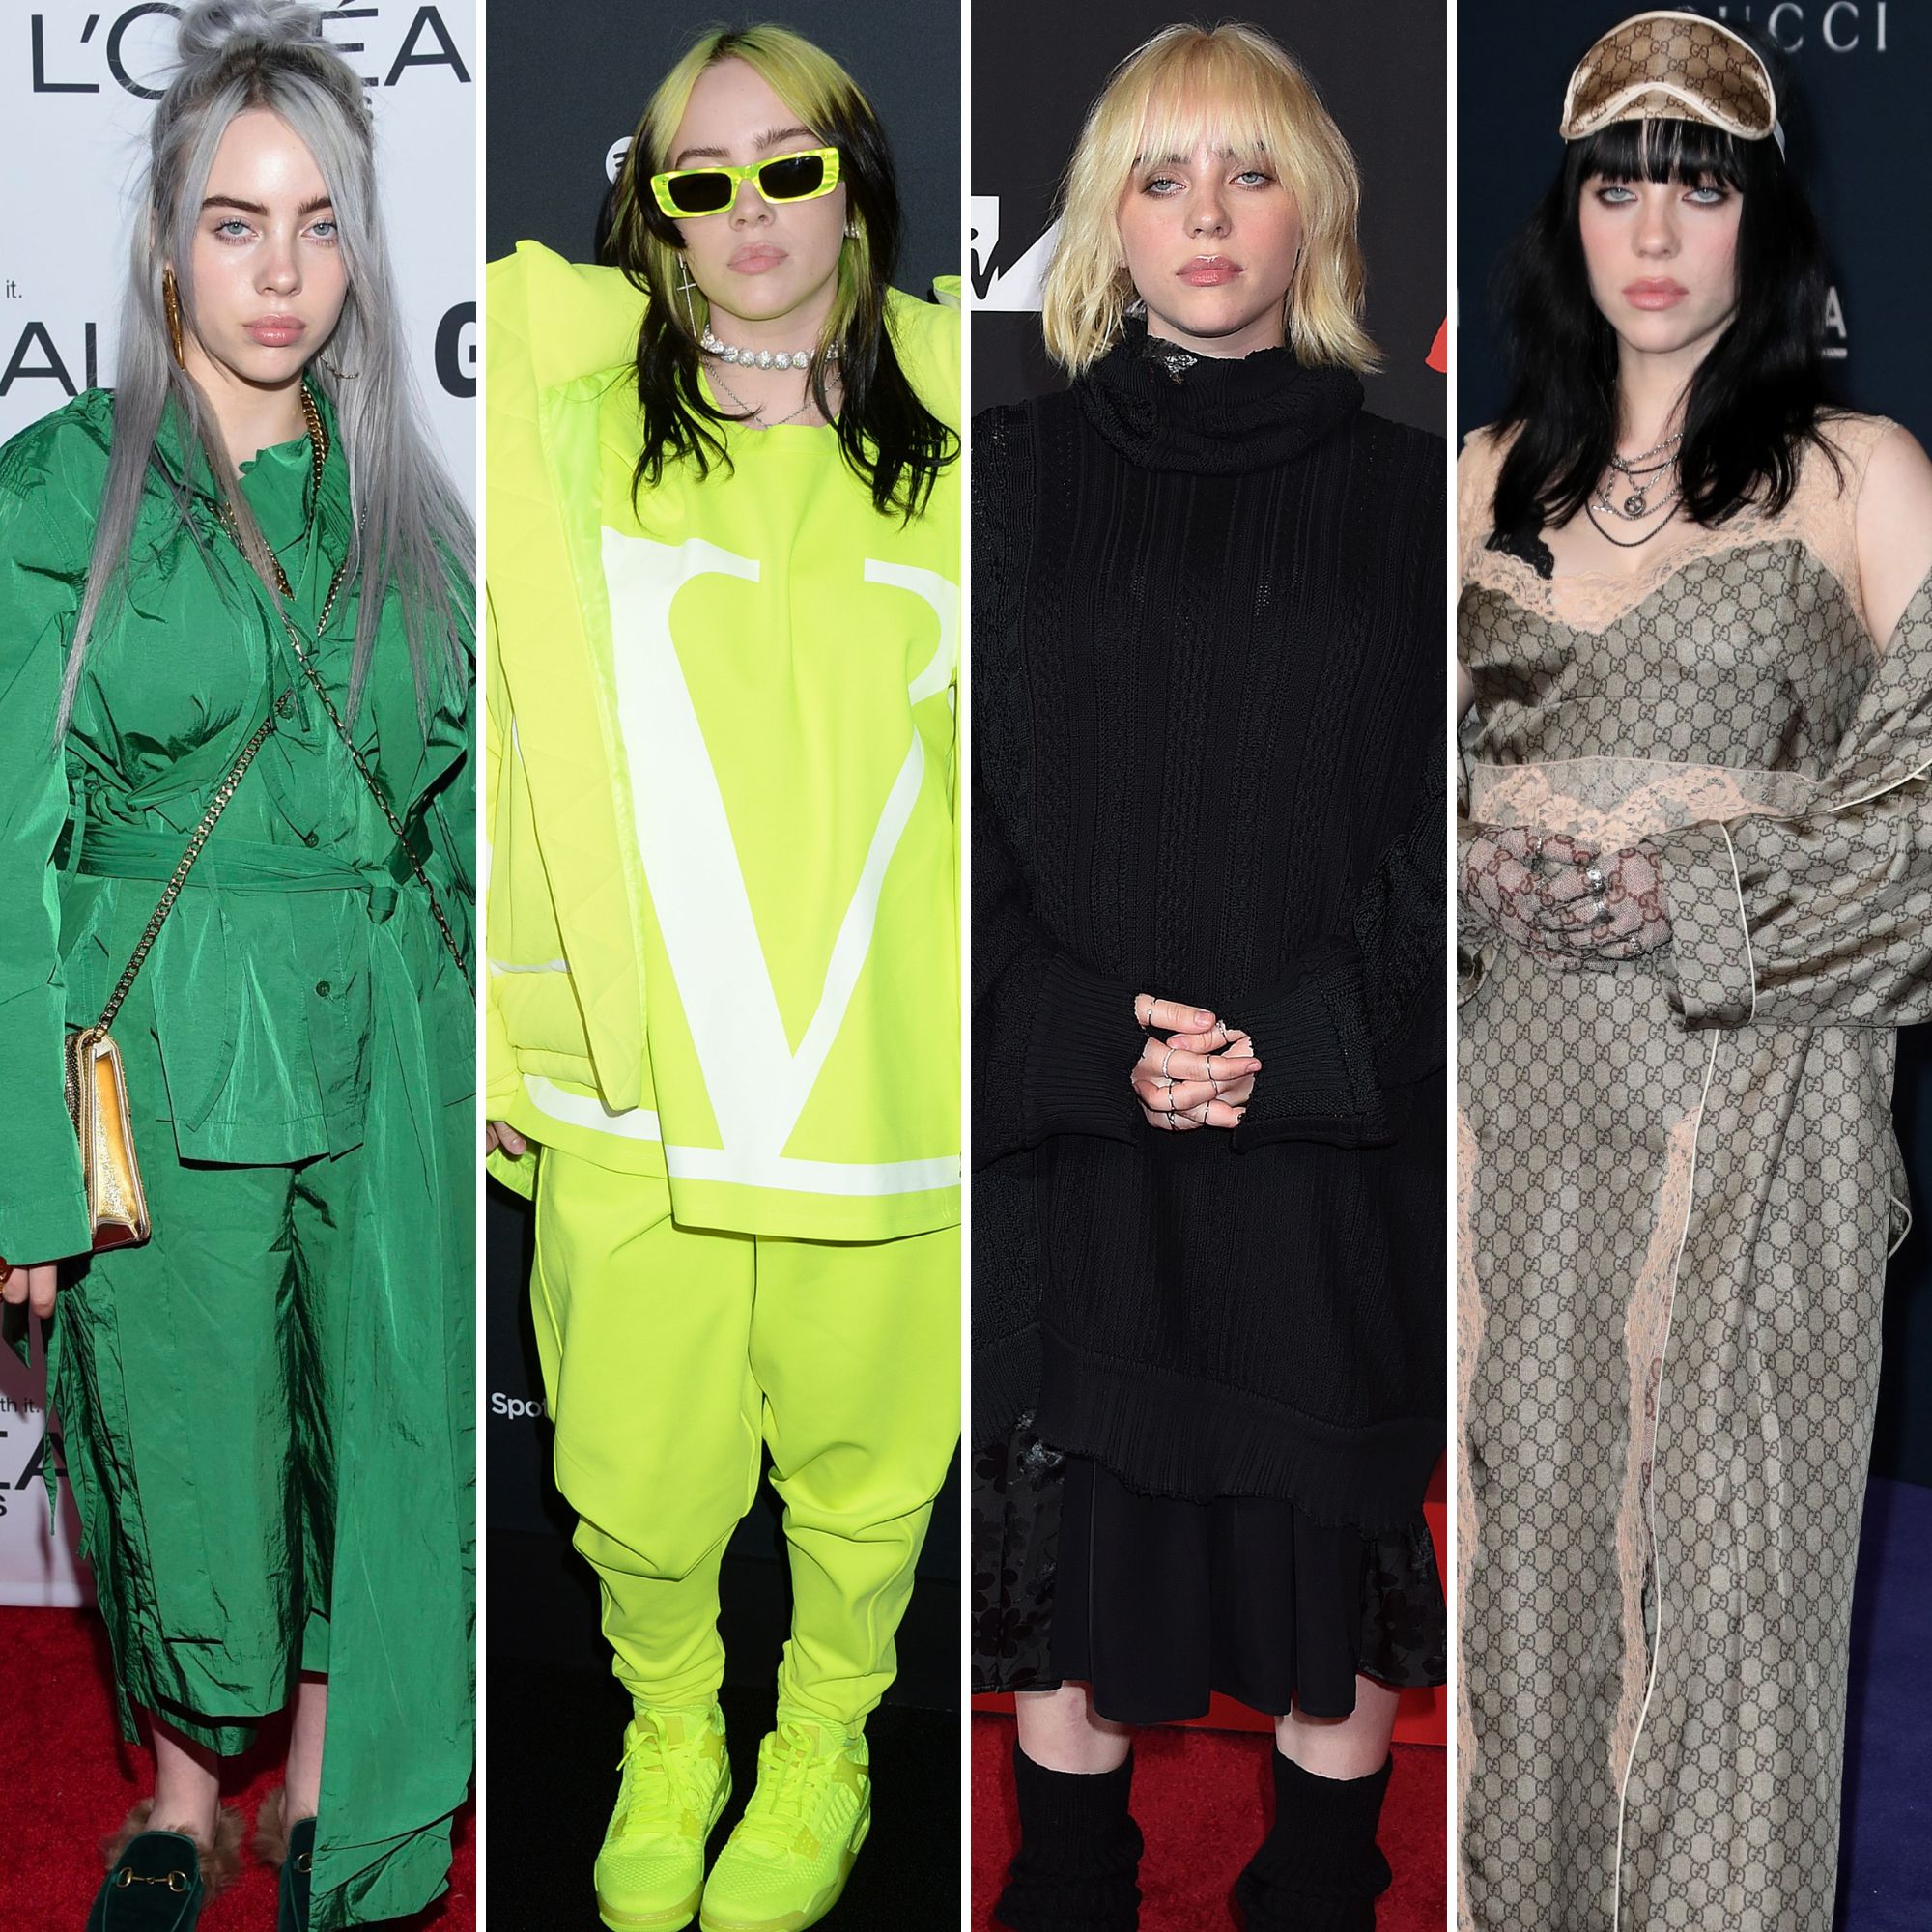 Billie Eilish Shares How She Built a Healthy Body Image After Struggling  During Adolescence - Sports Illustrated Lifestyle